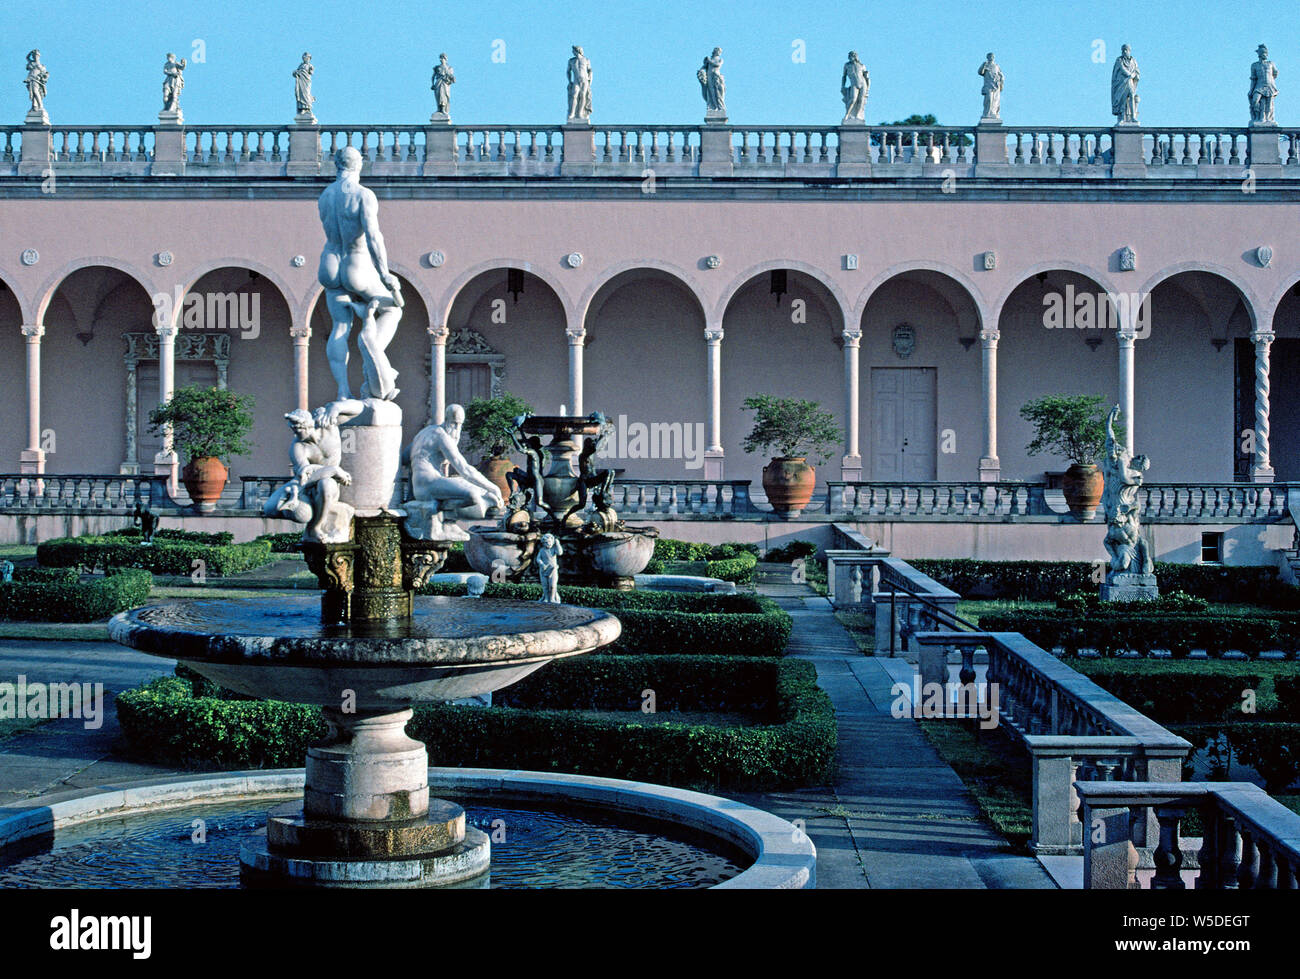 More than 250 pieces of outdoor statuary can be viewed in the Museum Courtyard of the John and Mabel Ringling Museum of Art in Sarasota, Florida, USA. The artworks were collected in Europe by John Ringling while searching for acts to perform back home in America with his famous Ringling Bros. and Barnum & Bailey Circus. Now renamed The Ringling, the 21-gallery museum is the official state art museum of Florida and showcases one of the preeminent art and cultural collections in the United States. Located near the Gulf of Mexico, the Museum of Art was first opened to the public in 1931. Stock Photo